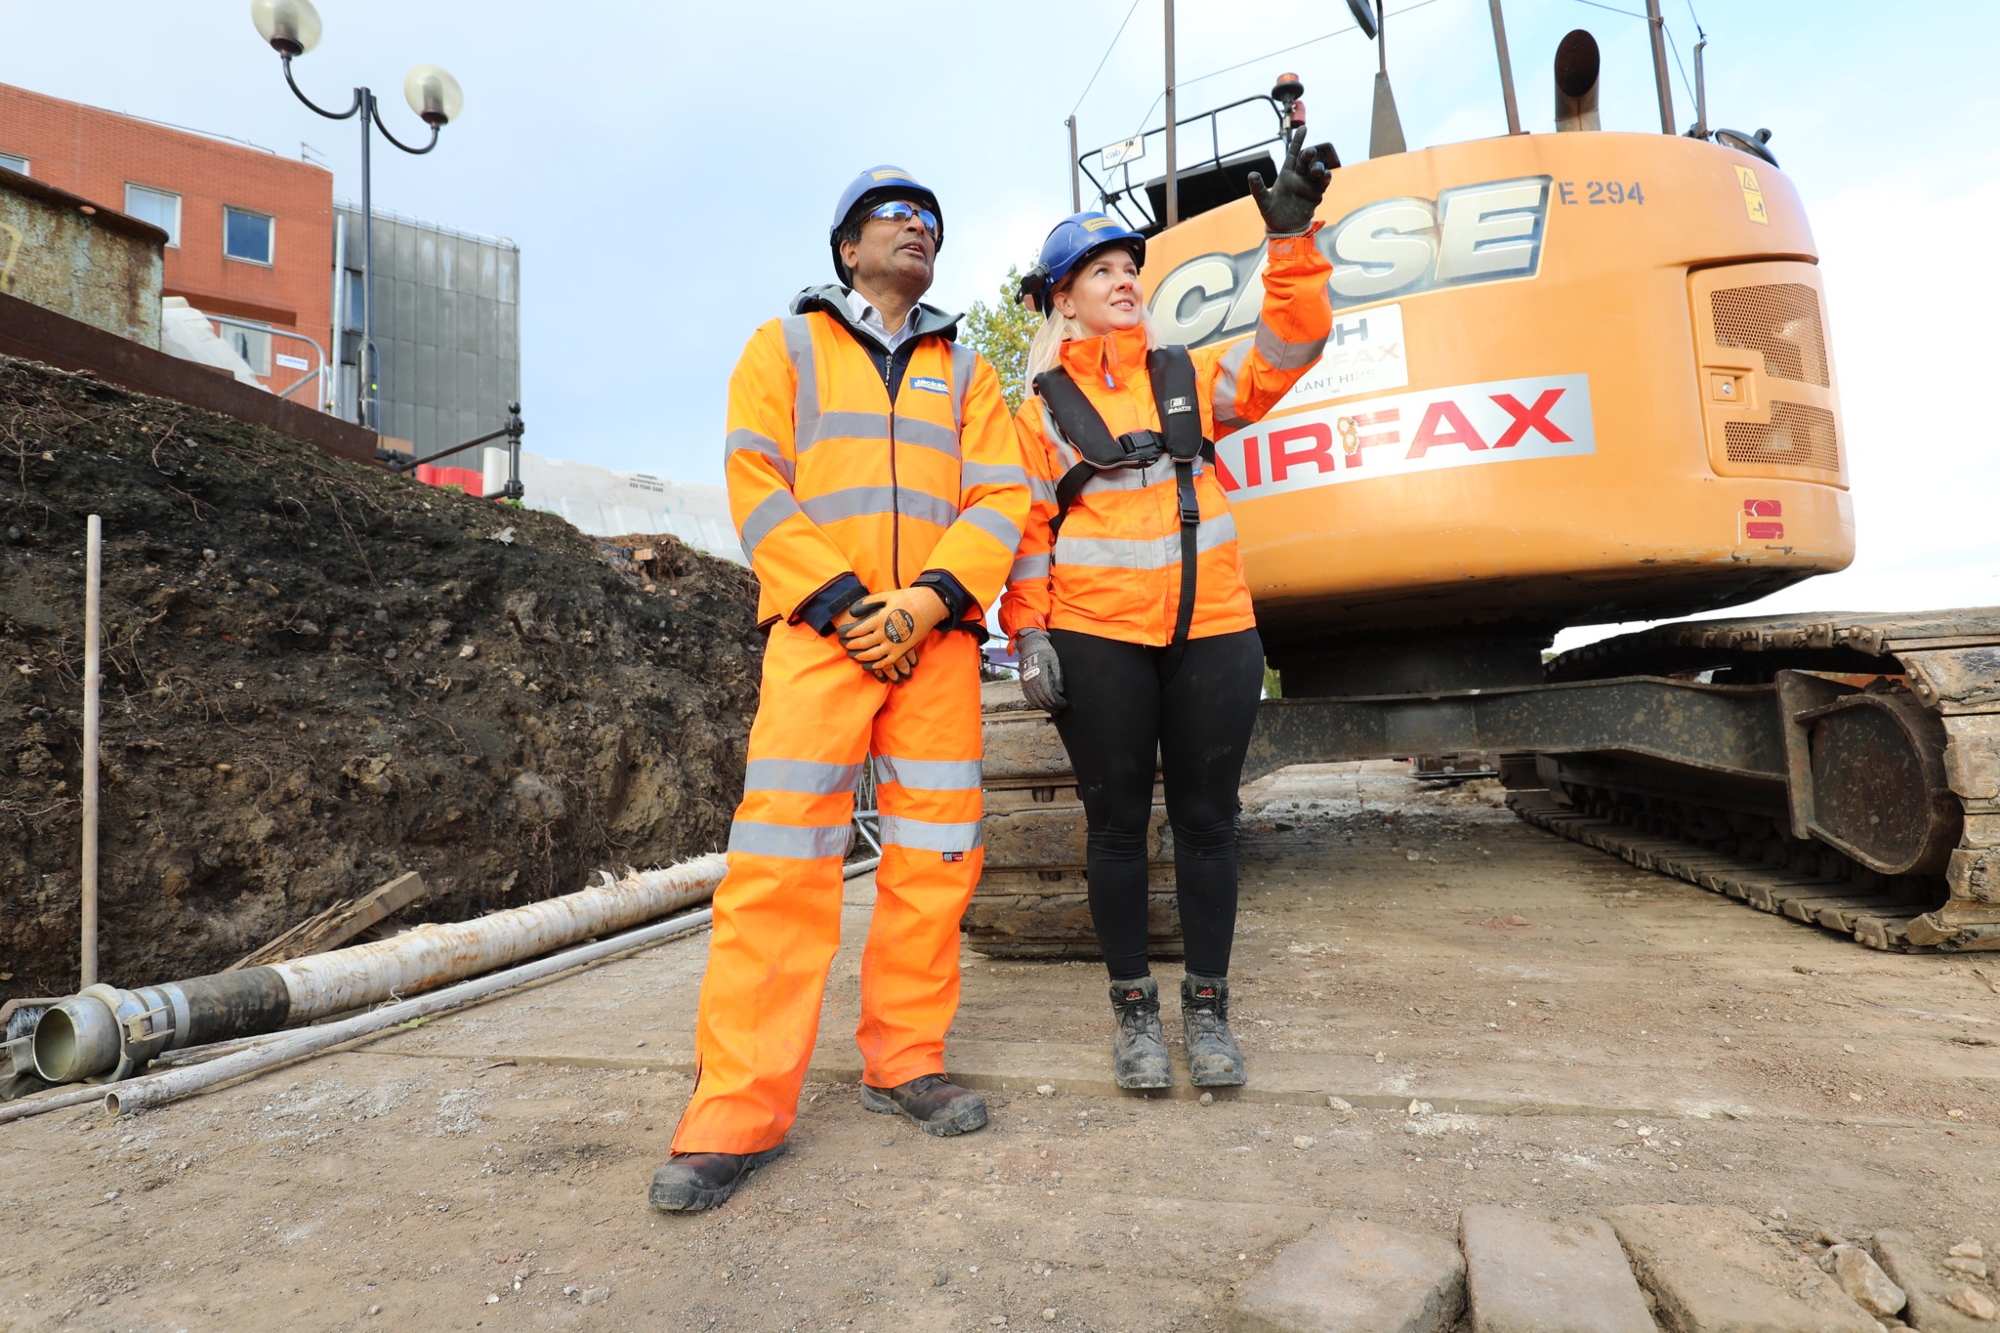 Initiatives aim to attract women into civil engineering